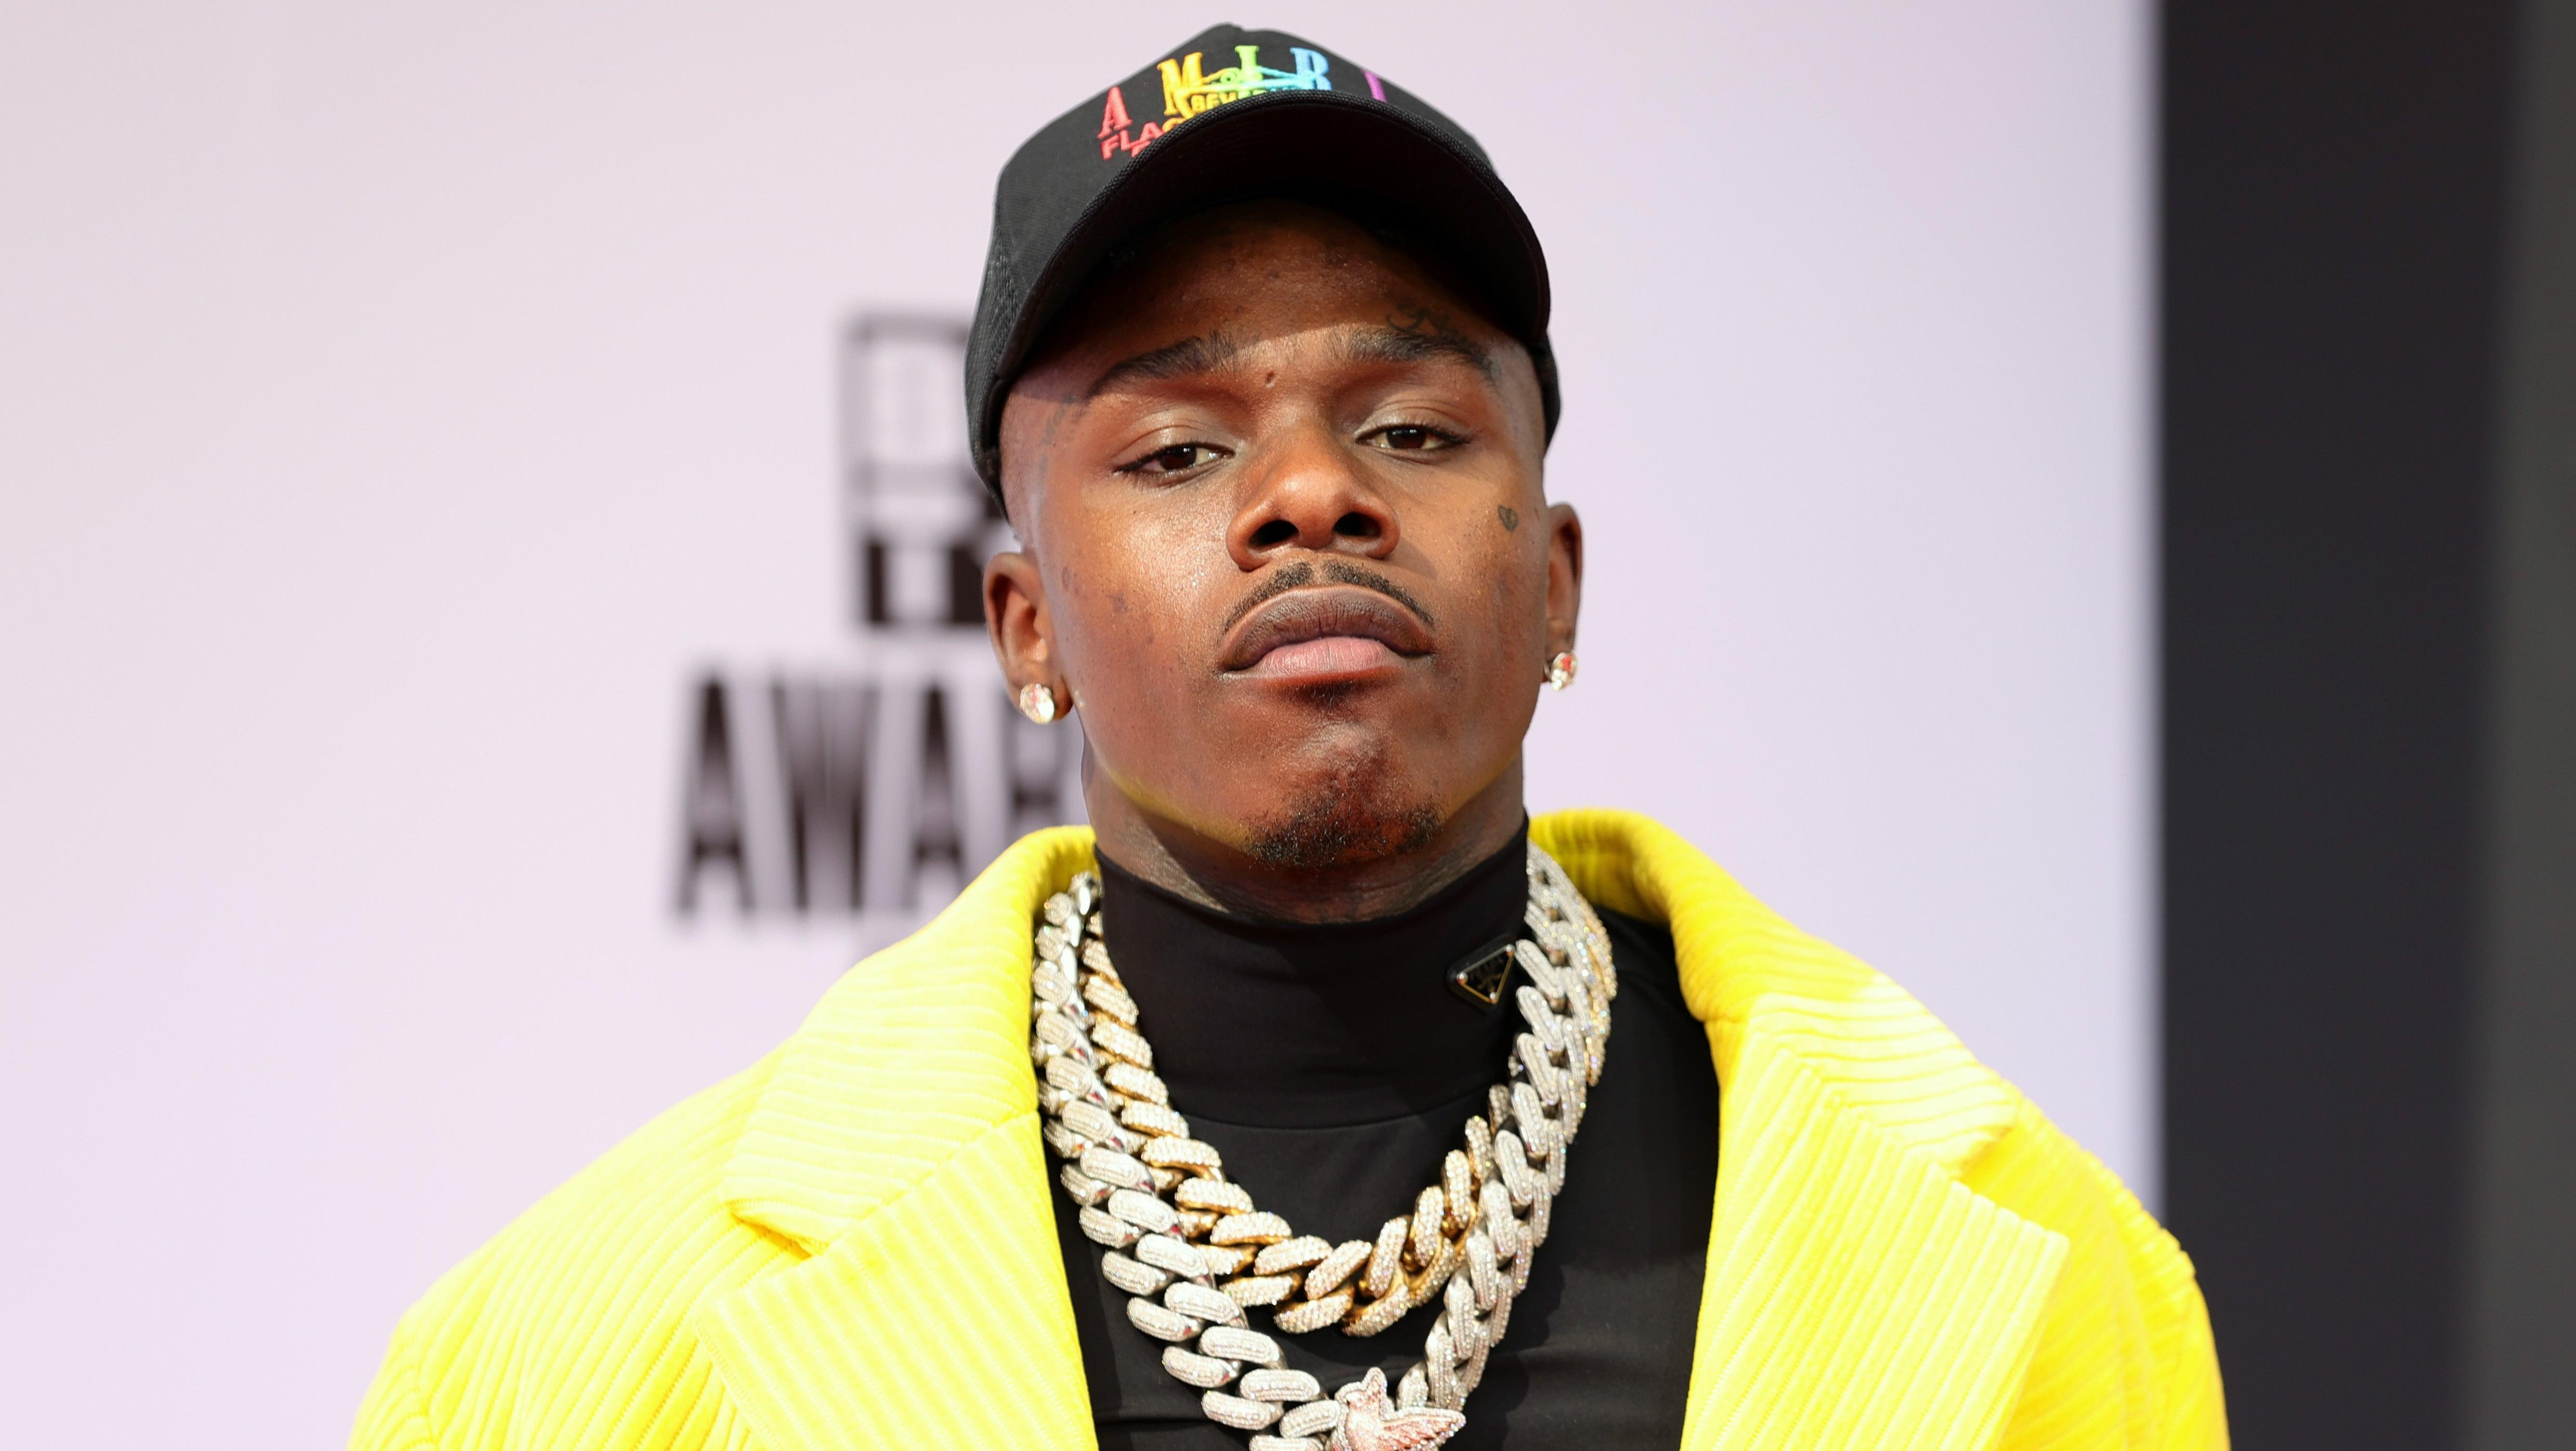 New video calls into question DaBaby’s self-defense claims in 2018 killing, report says